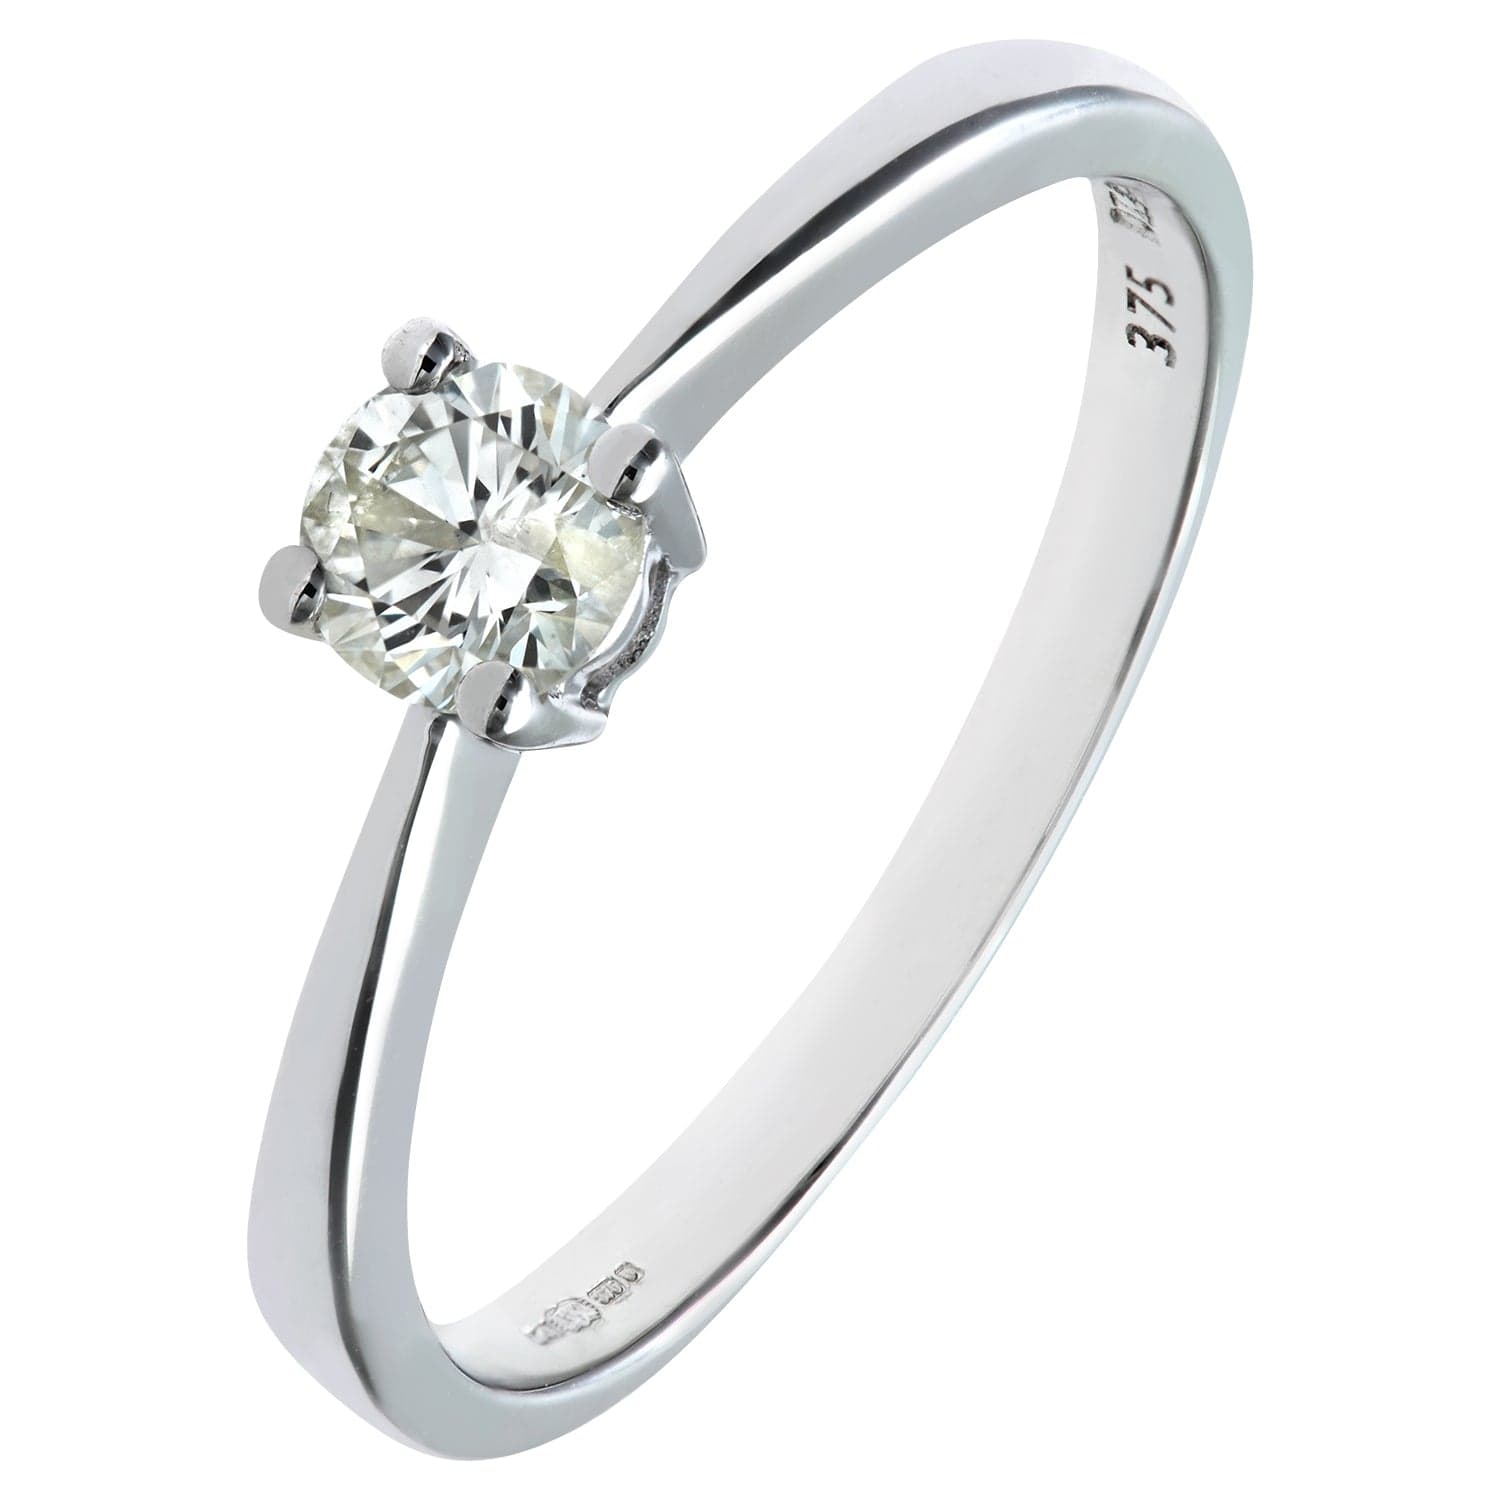 Lynora Luxe Ring White Gold 9ct / Diamond 9ct White Gold 0.33ct Diamond Engagement Ring